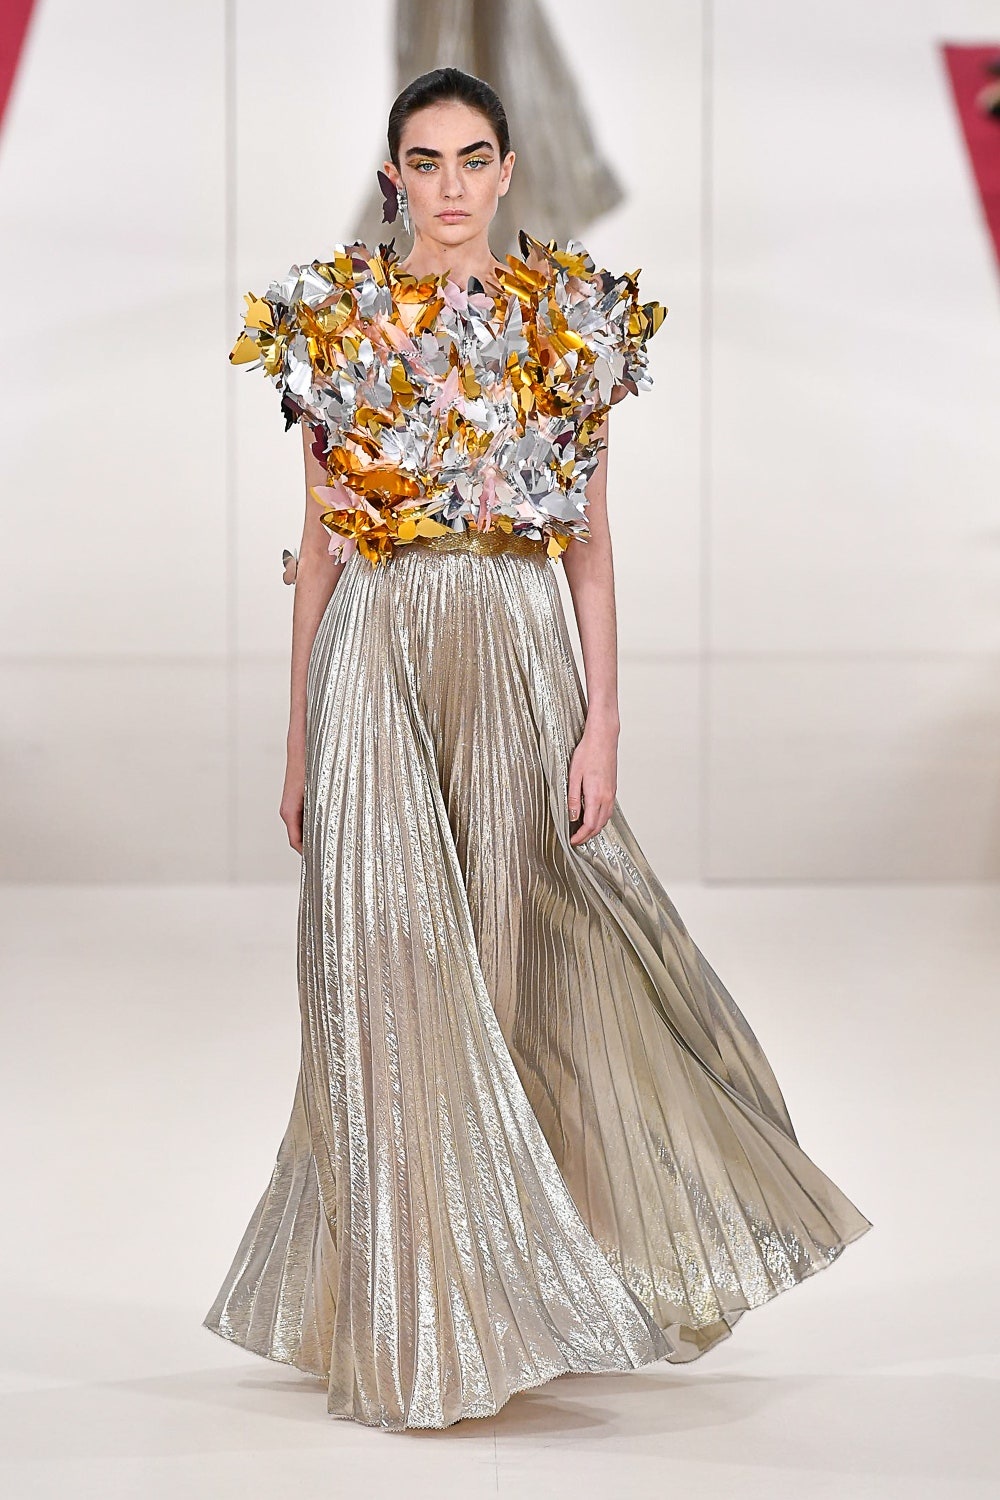 Alexis Mabille Spring Summer 2022 Haute Couture Fashion Show